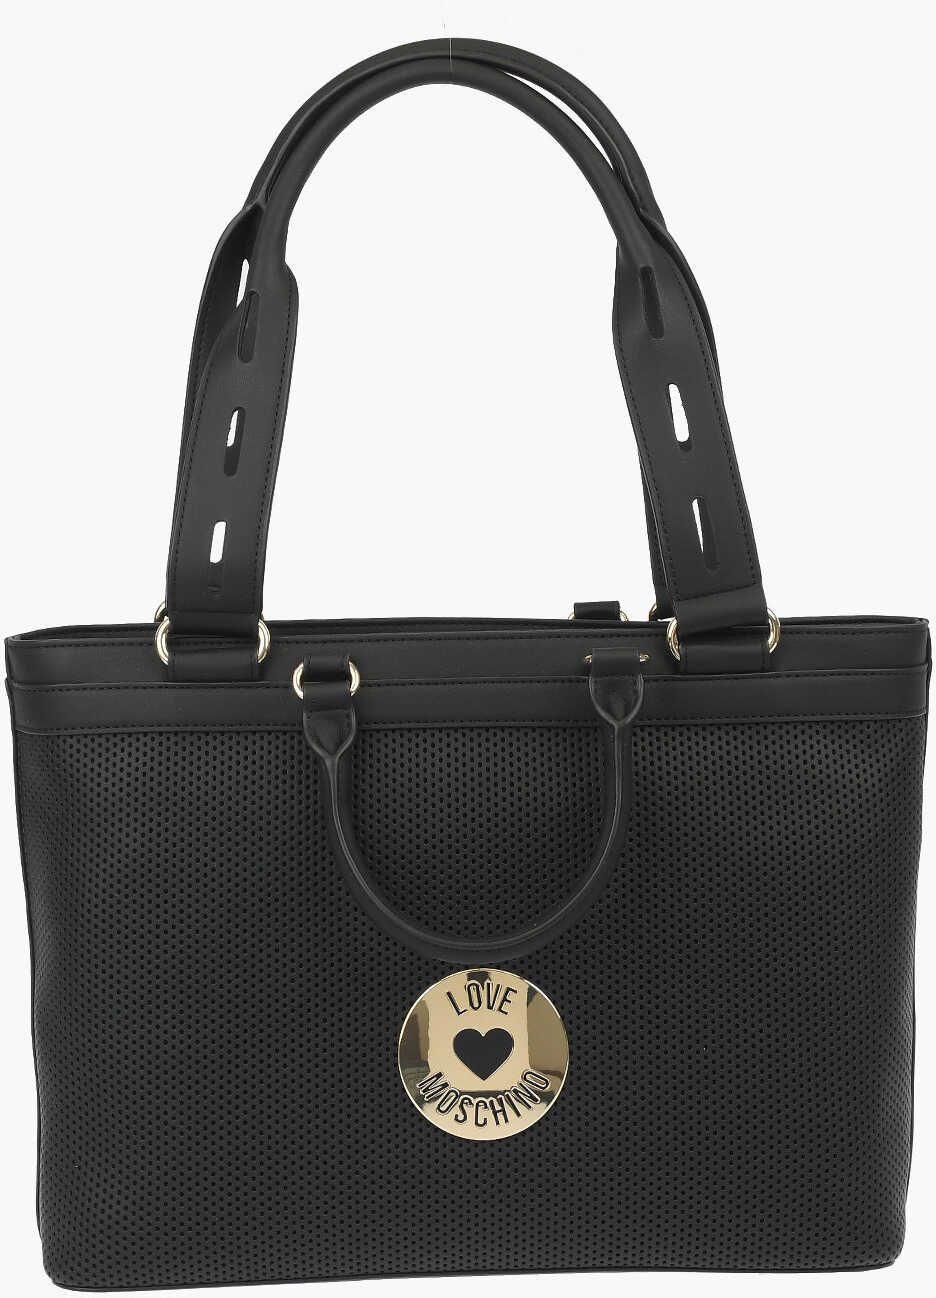 Moschino Love Perforated Faux Leather Tote Bag Black b-mall.ro